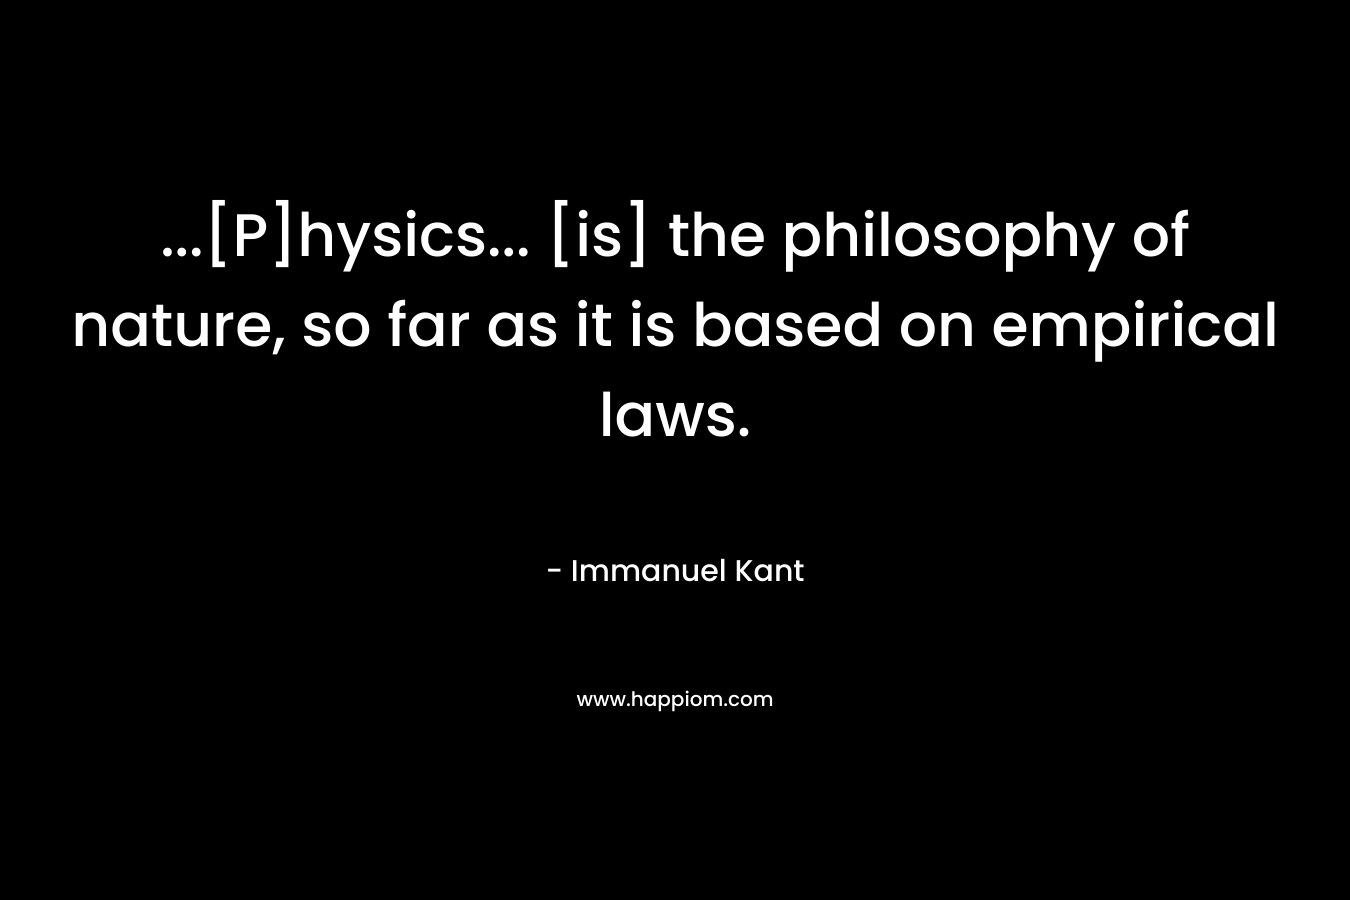 ...[P]hysics... [is] the philosophy of nature, so far as it is based on empirical laws.